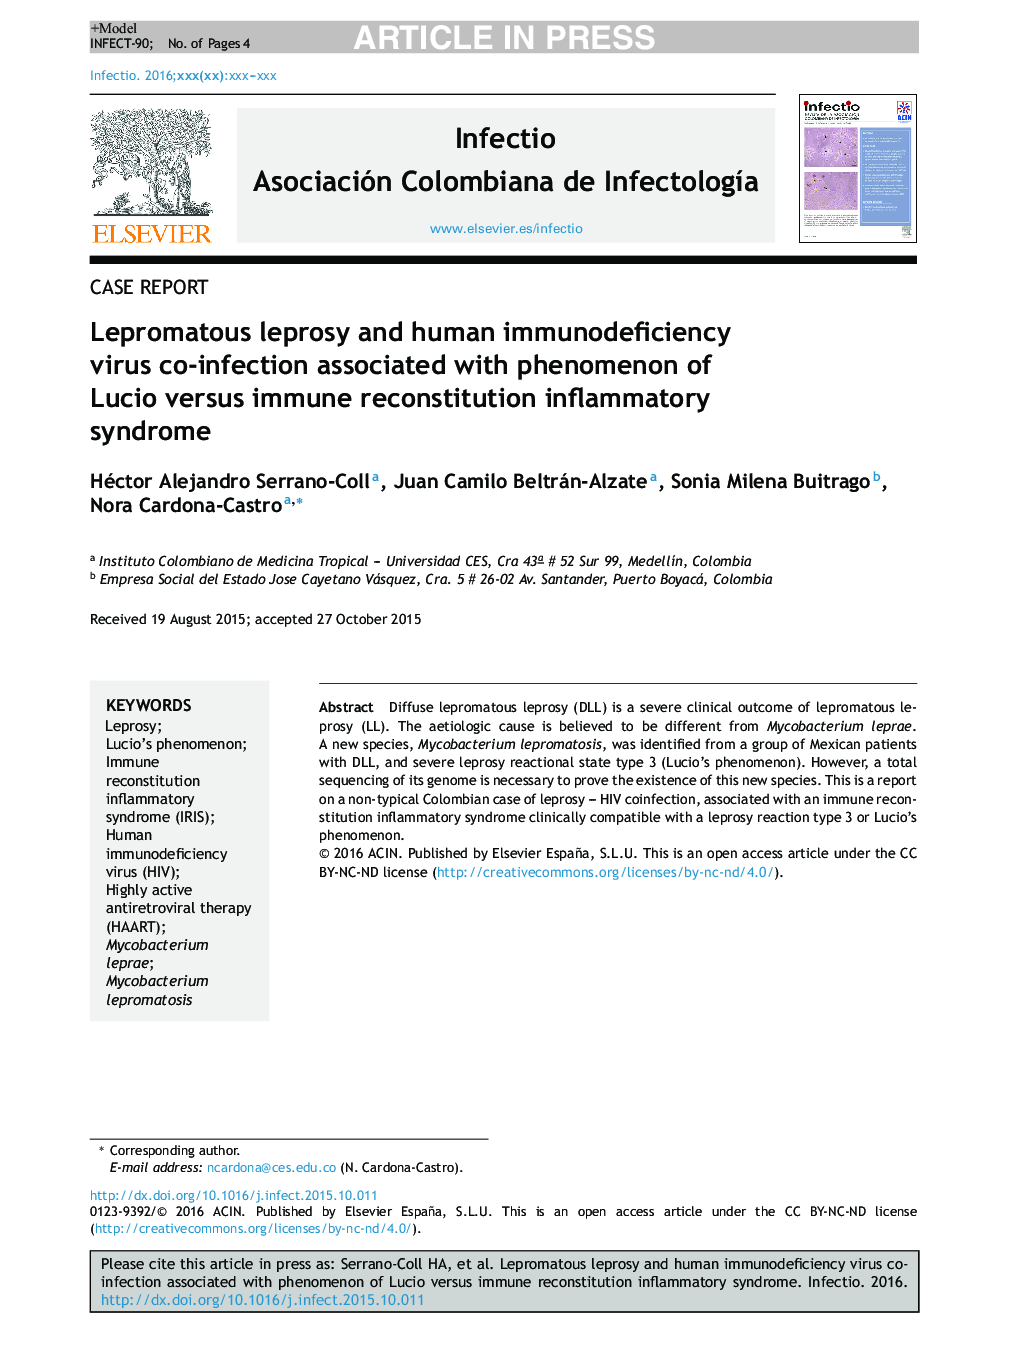 Lepromatous leprosy and human immunodeficiency virus co-infection associated with phenomenon of Lucio versus immune reconstitution inflammatory syndrome